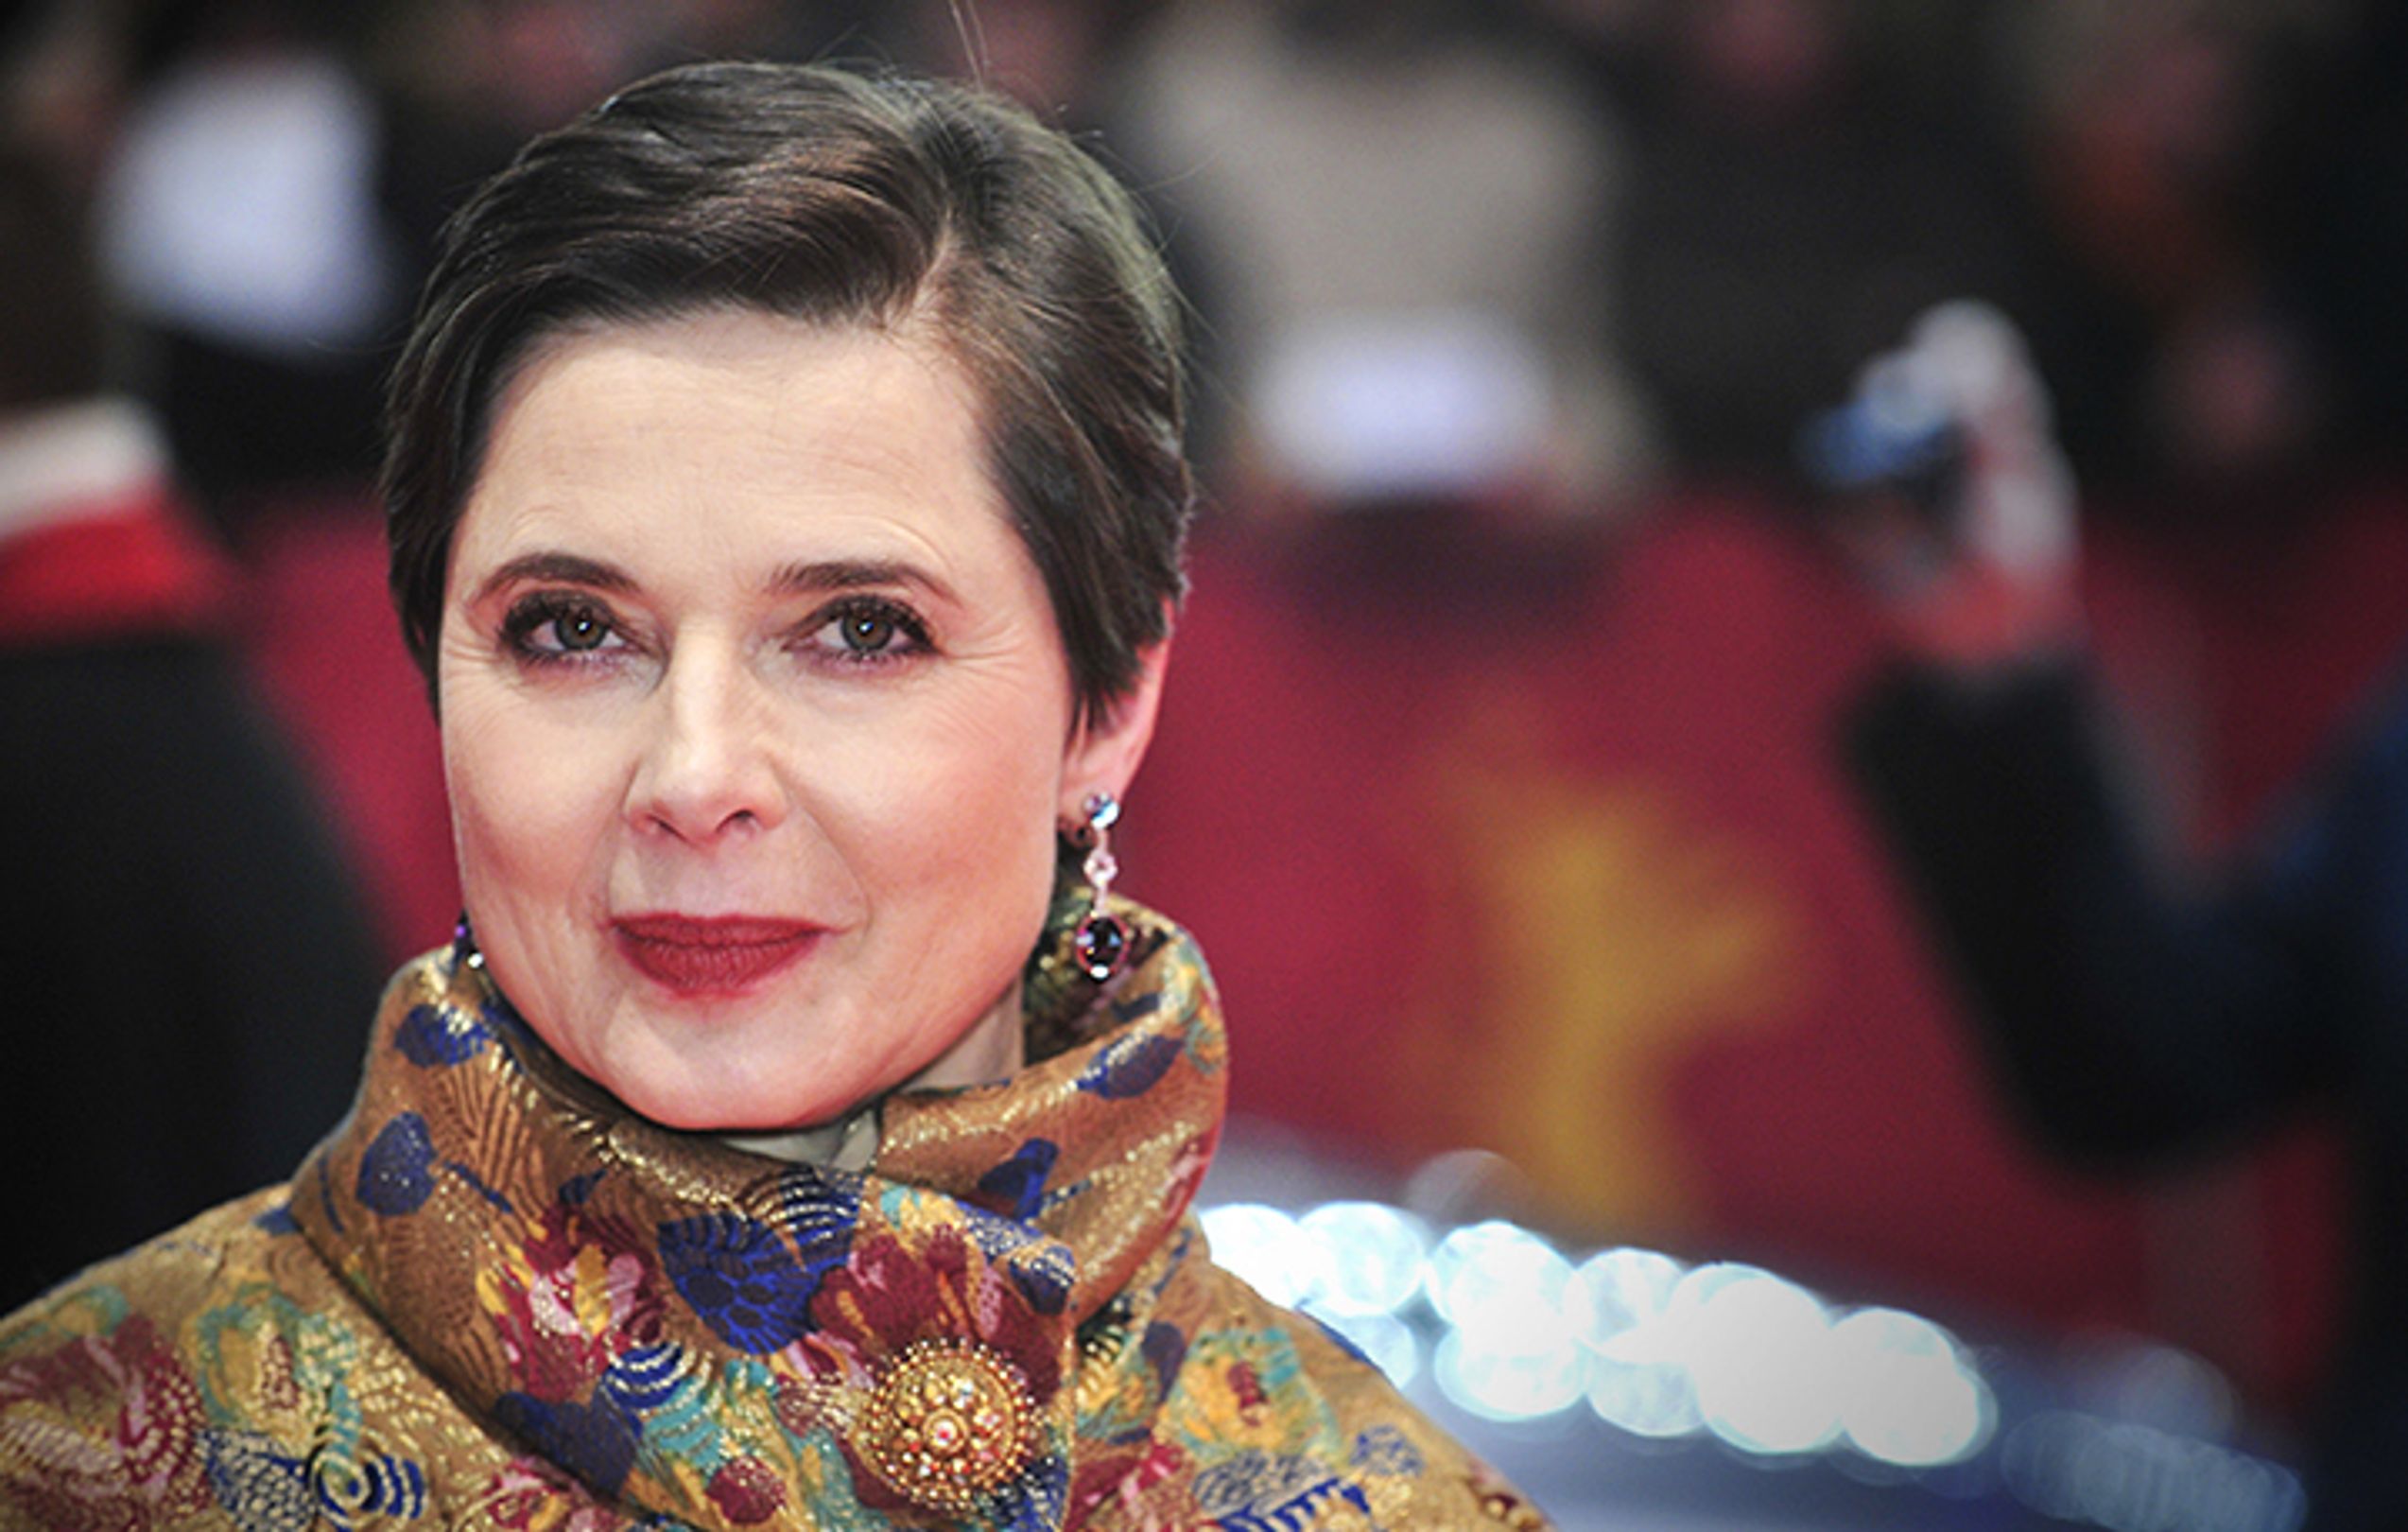 Isabella rossellini of pictures Download Isabella